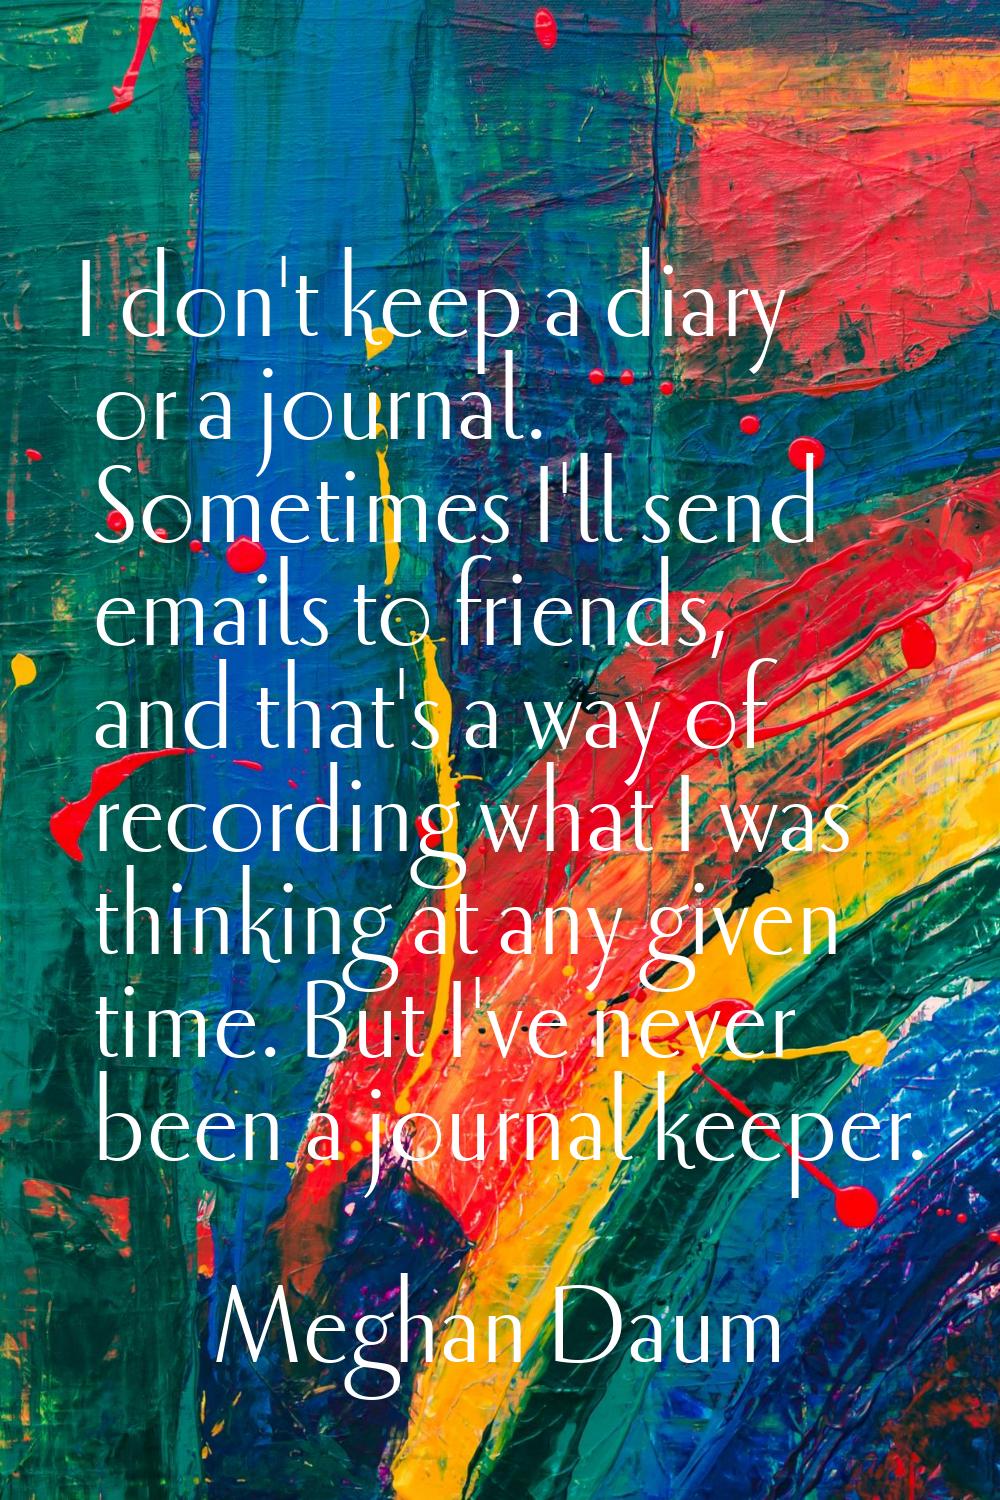 I don't keep a diary or a journal. Sometimes I'll send emails to friends, and that's a way of recor